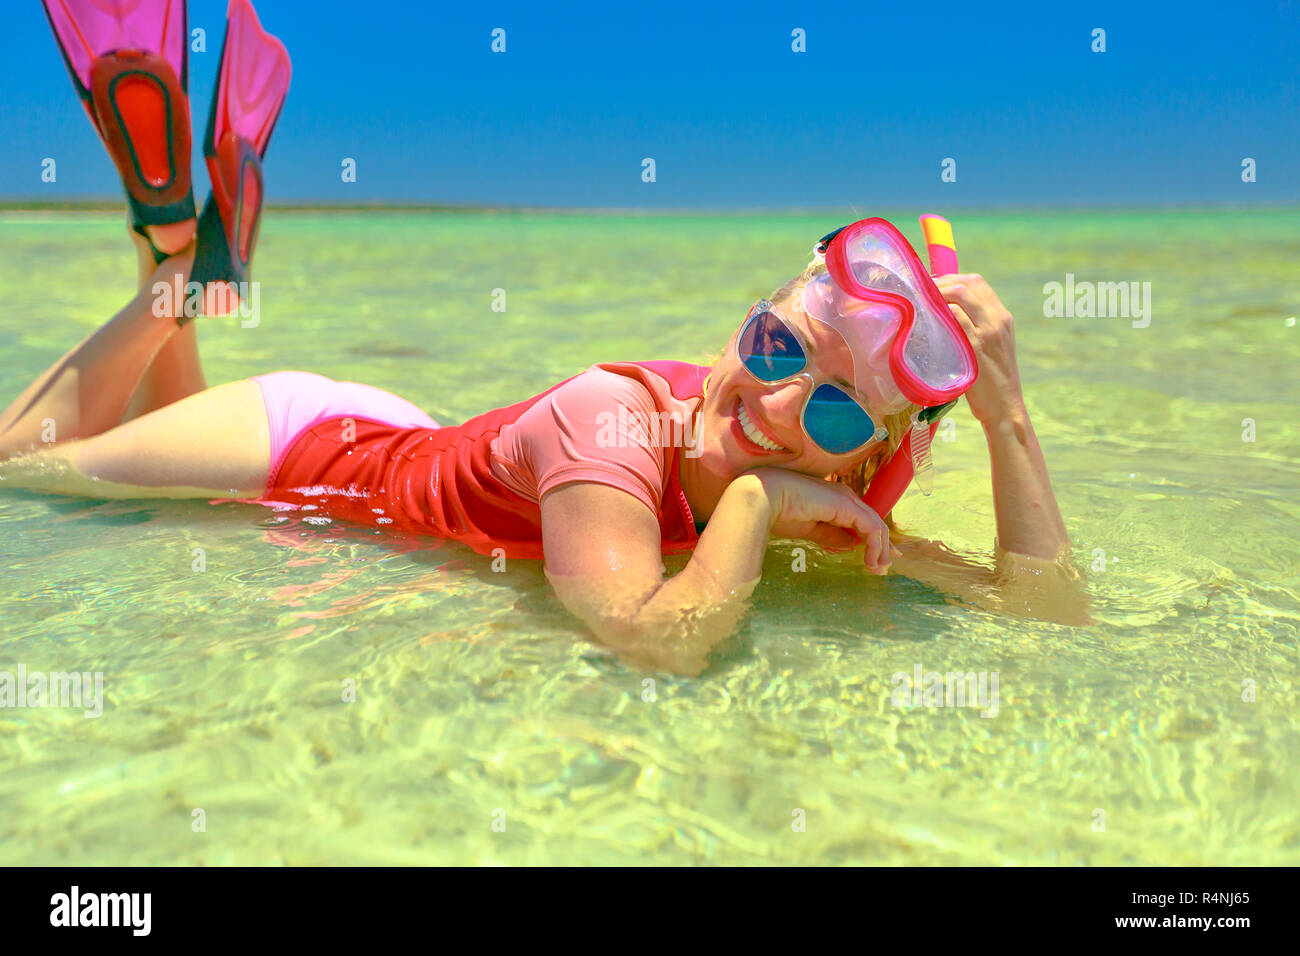 happy lifestyle woman with snorkeling wetsuit, mask and fins pink and peach color, sunbathing lying in a natural pool of Little Lagoon in Shark Bay, Denham, Western Australia. Stock Photo